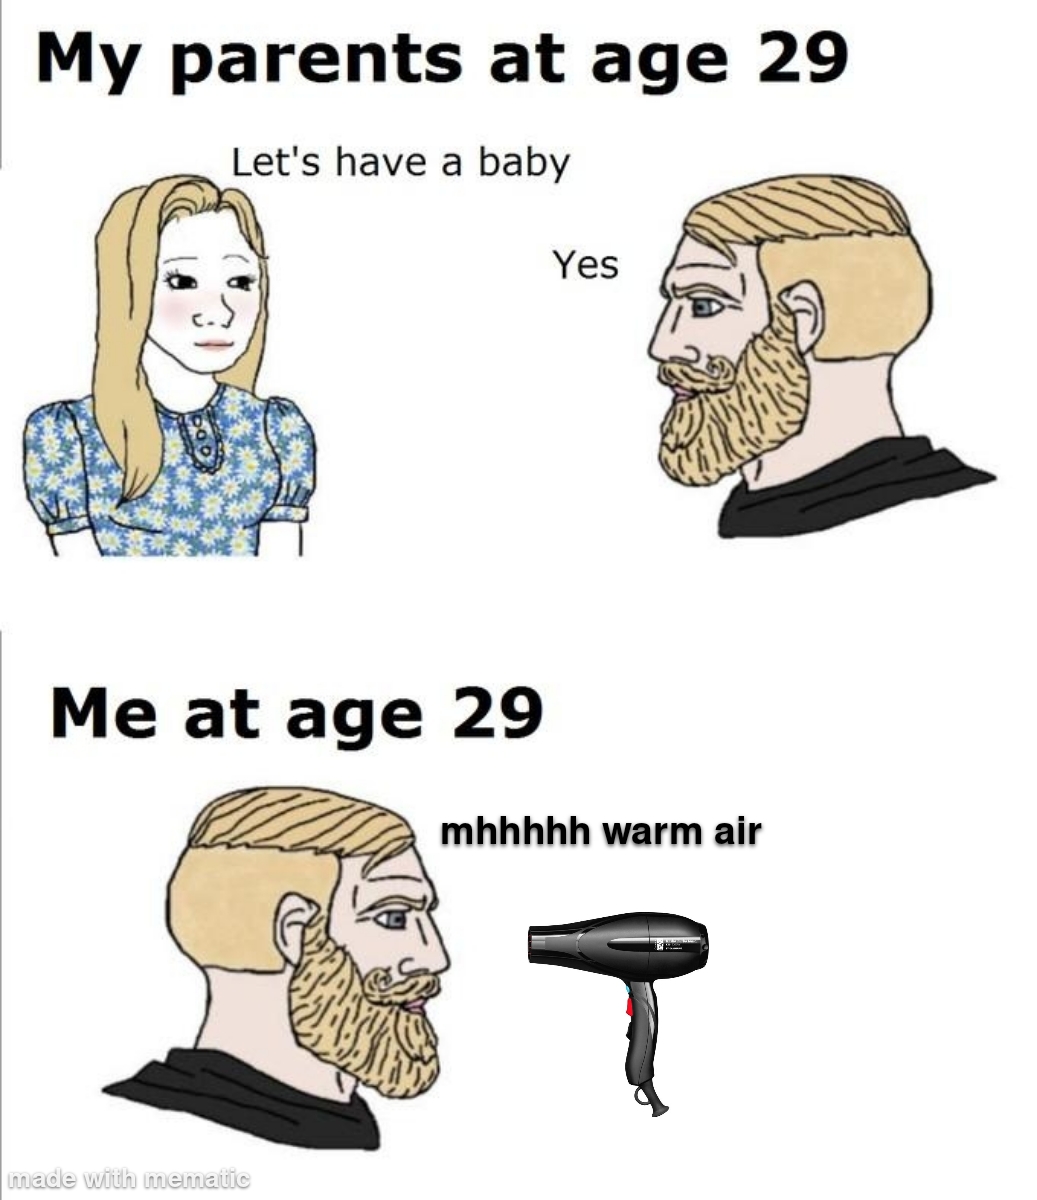 dank memes - my parents at age - My parents at age 29 Let's have a baby Yes Me at age 29 mhhhhh warm air made with mematic